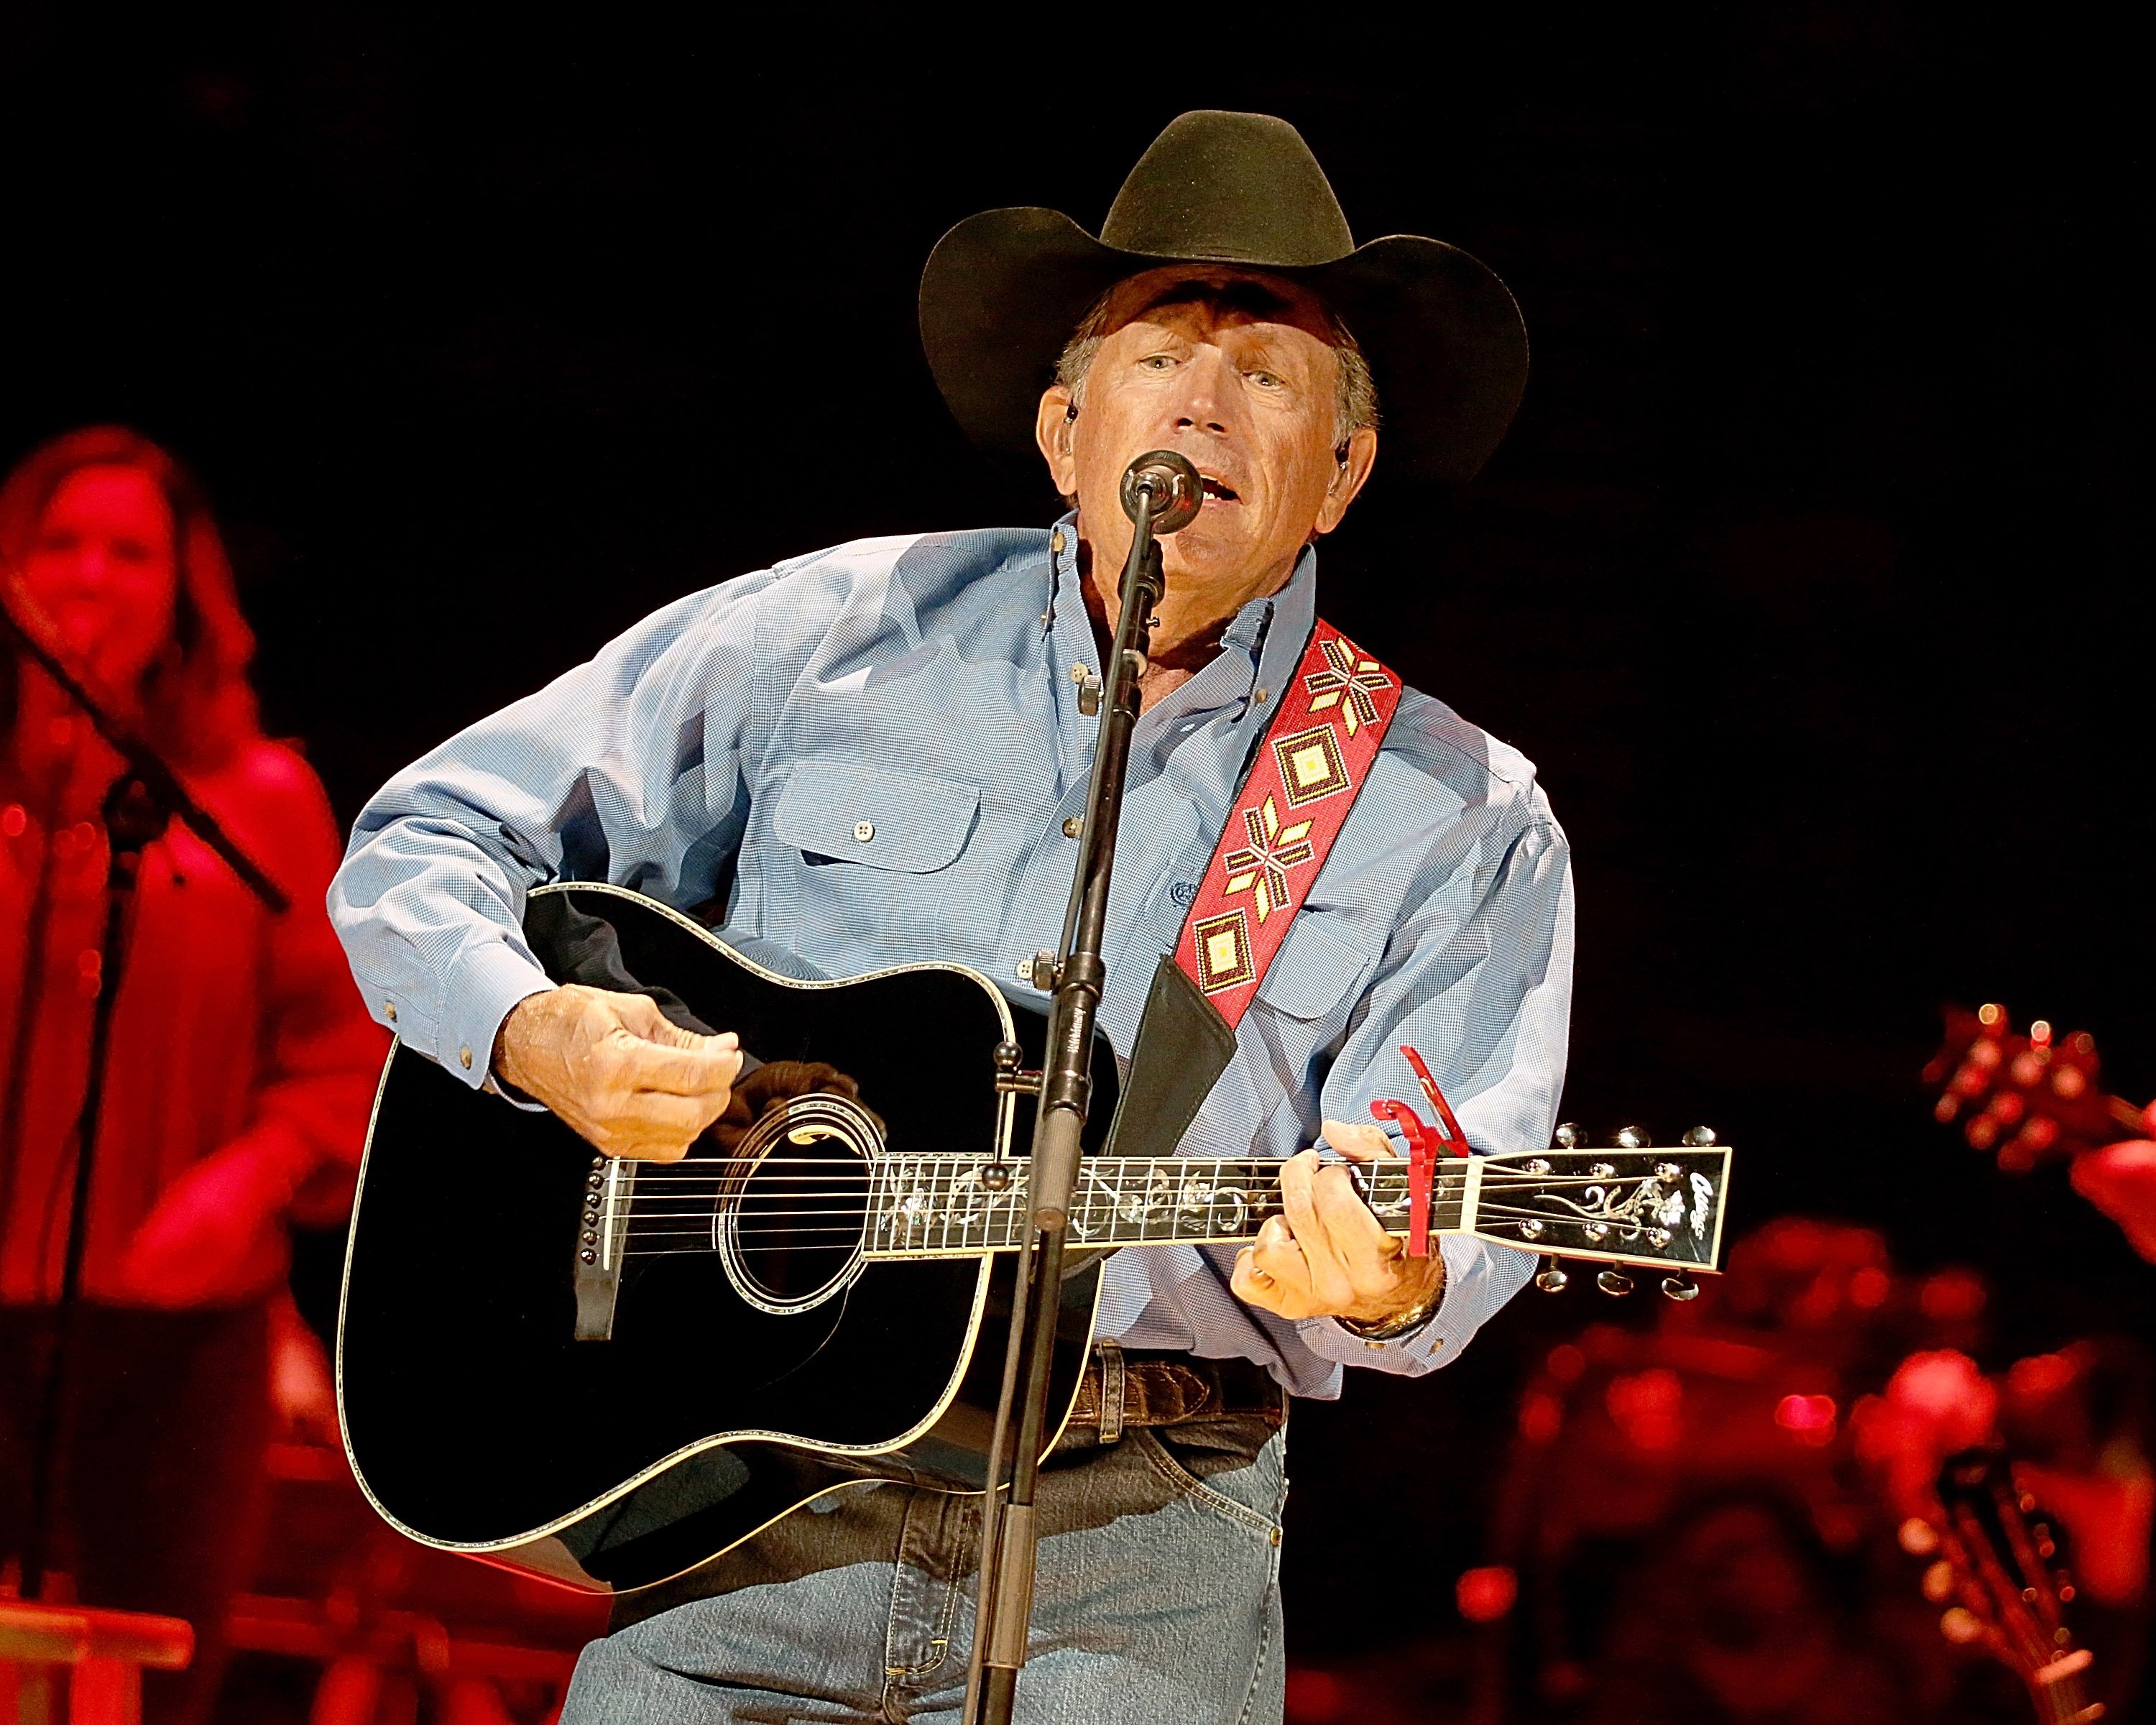 Country singer George Strait performs at The Frank Erwin Center on June 3 2018 in Austin Texas | Source: Getty Images